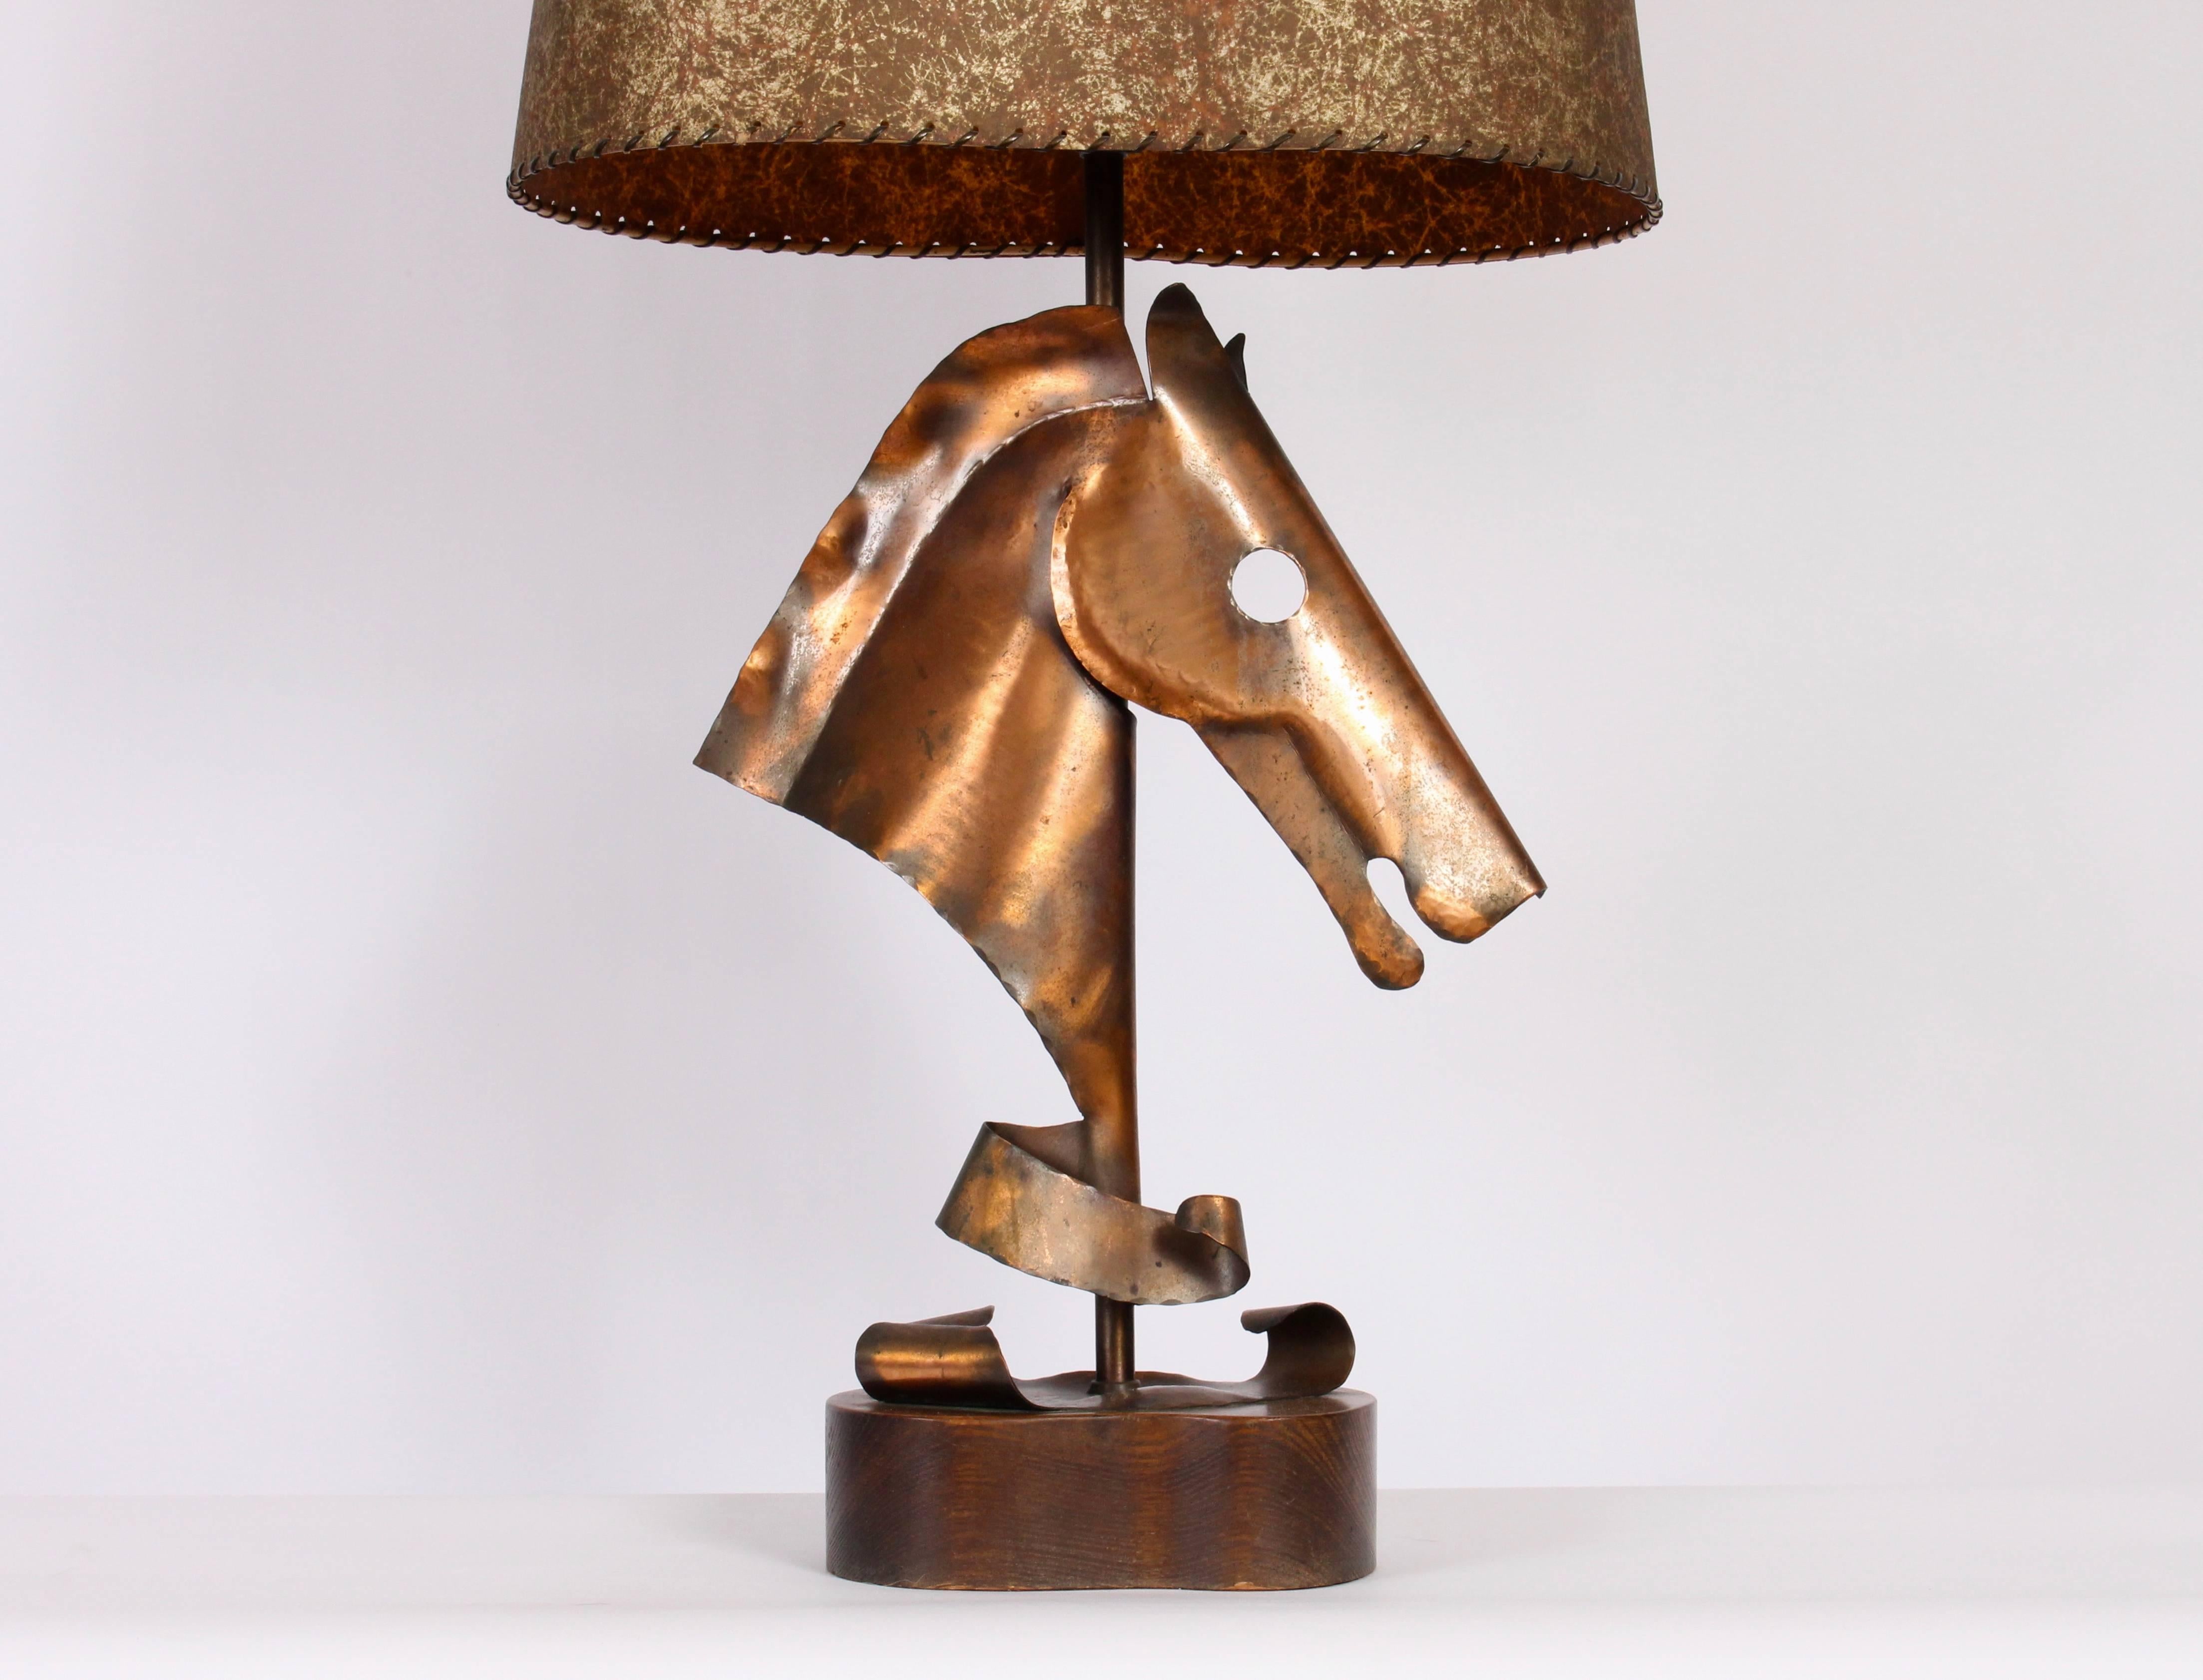 Art Deco Modern Handcrafted Yasha Heifetz Copper and Dark Oak Equestrian Table Lamp. Featuring a handcrafted hammered Copper Horse Head with refinished organic kidney bean Oak base (8.5x 5.5). Original brass socket, harp, finial with new turn